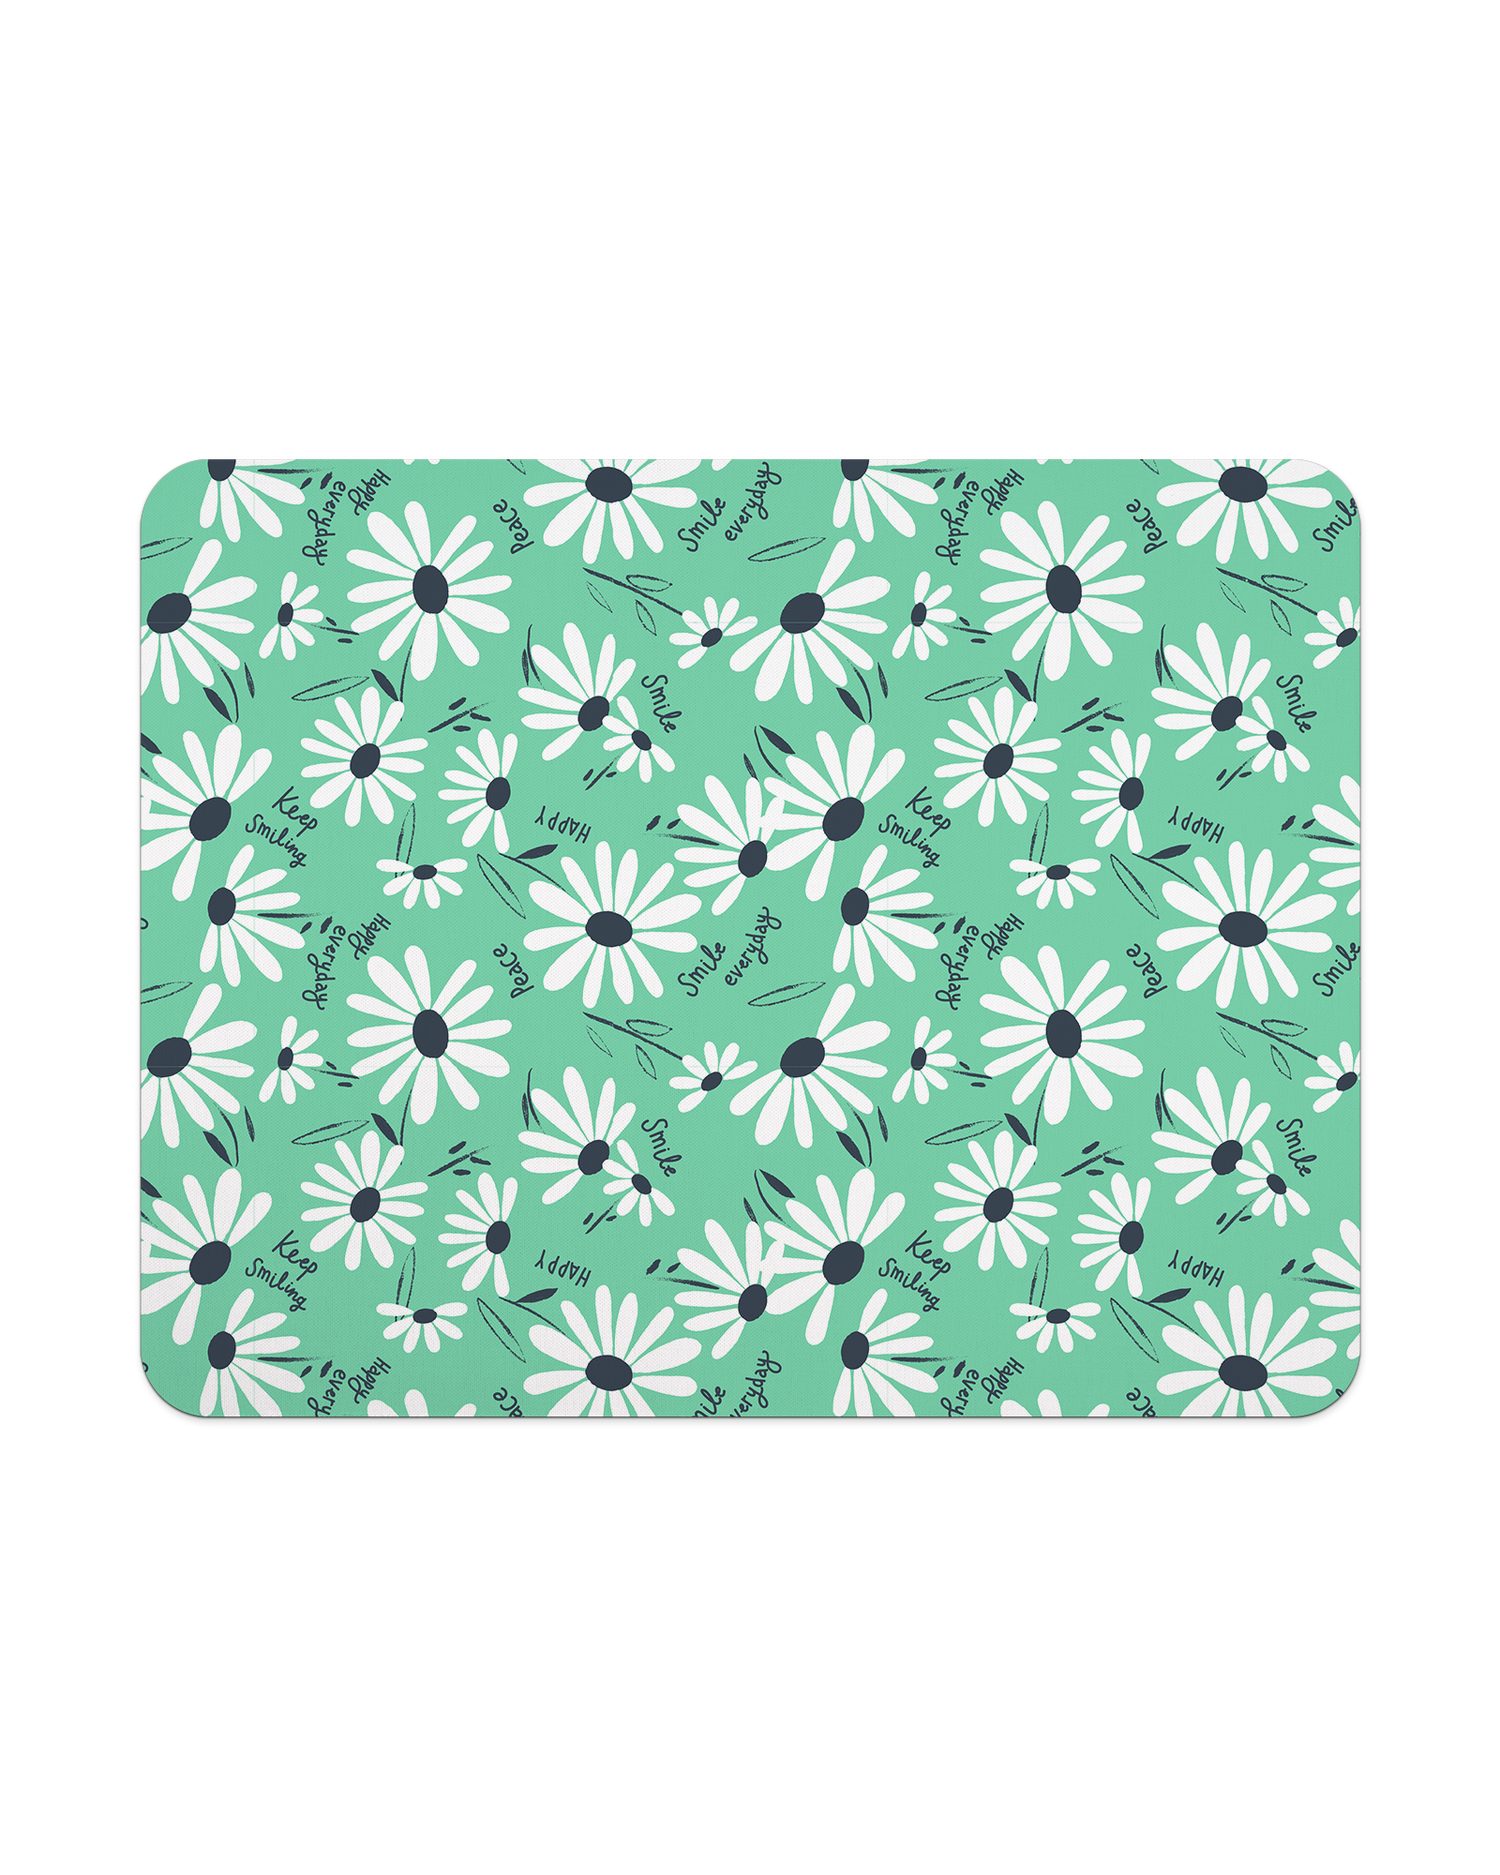 Positive Daisies Mouse Pad from Top